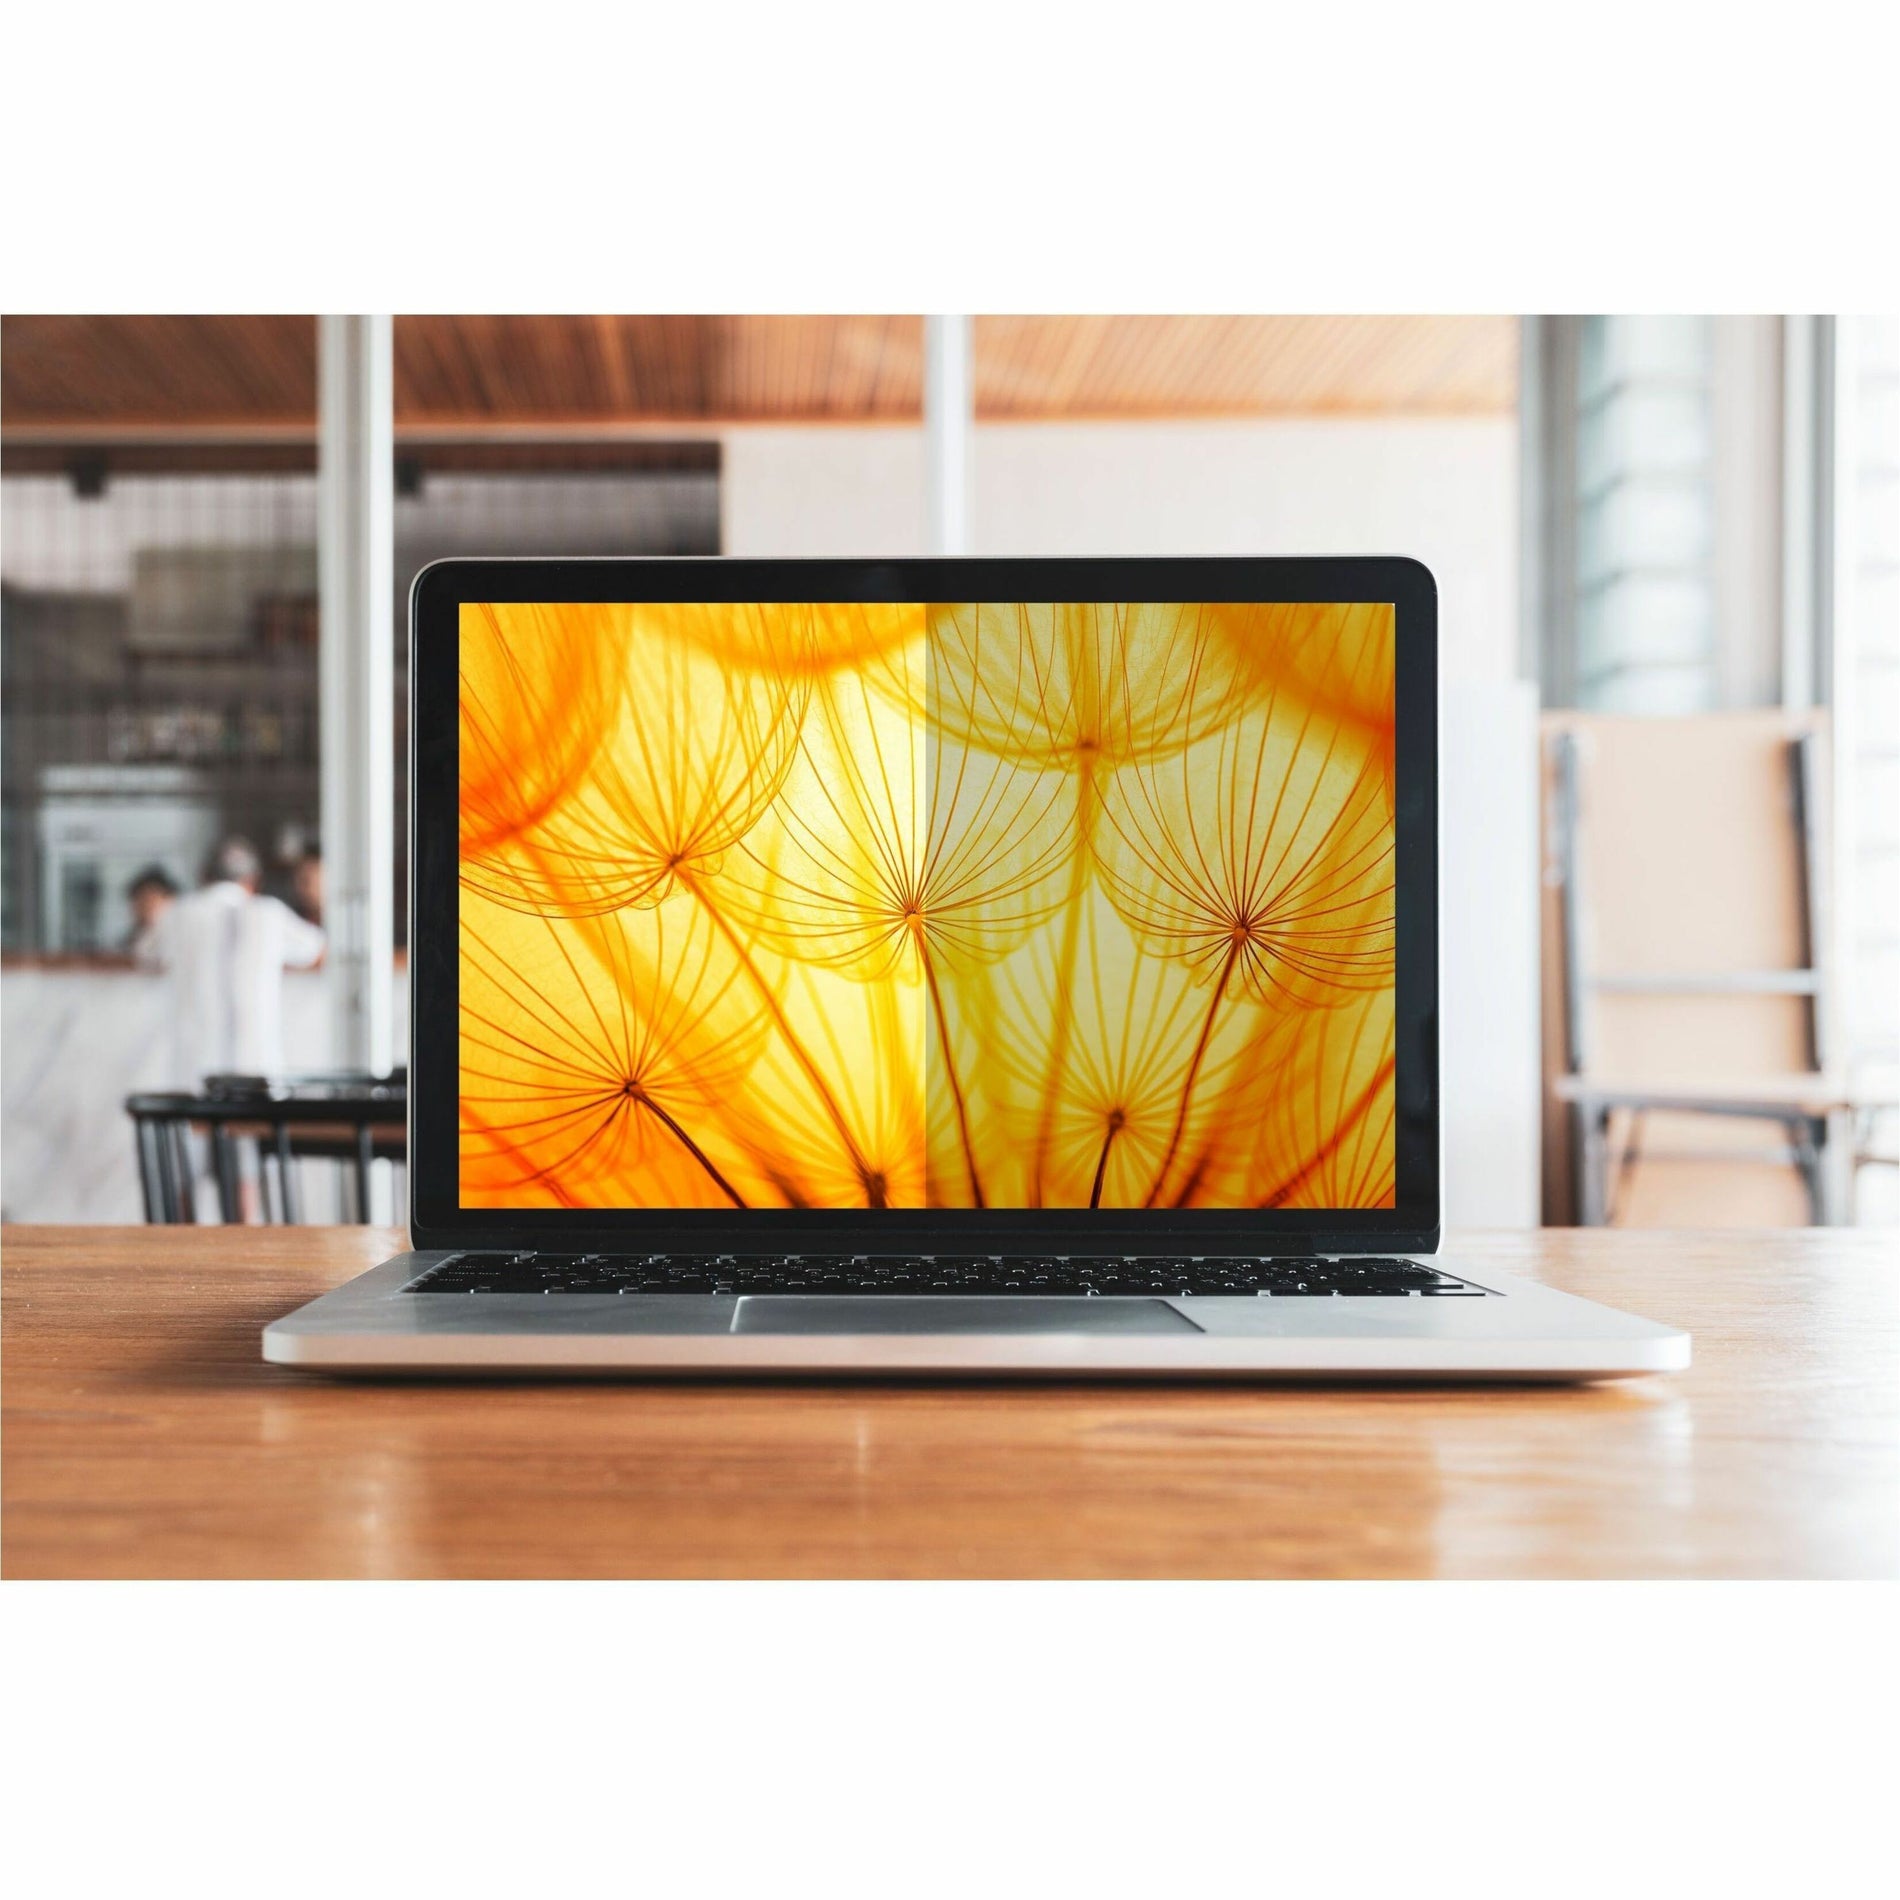 3M BP160W1B Bright Screen Privacy Filter for 16in Laptop, 16:10, Easy to Apply, Blue Light Reduction